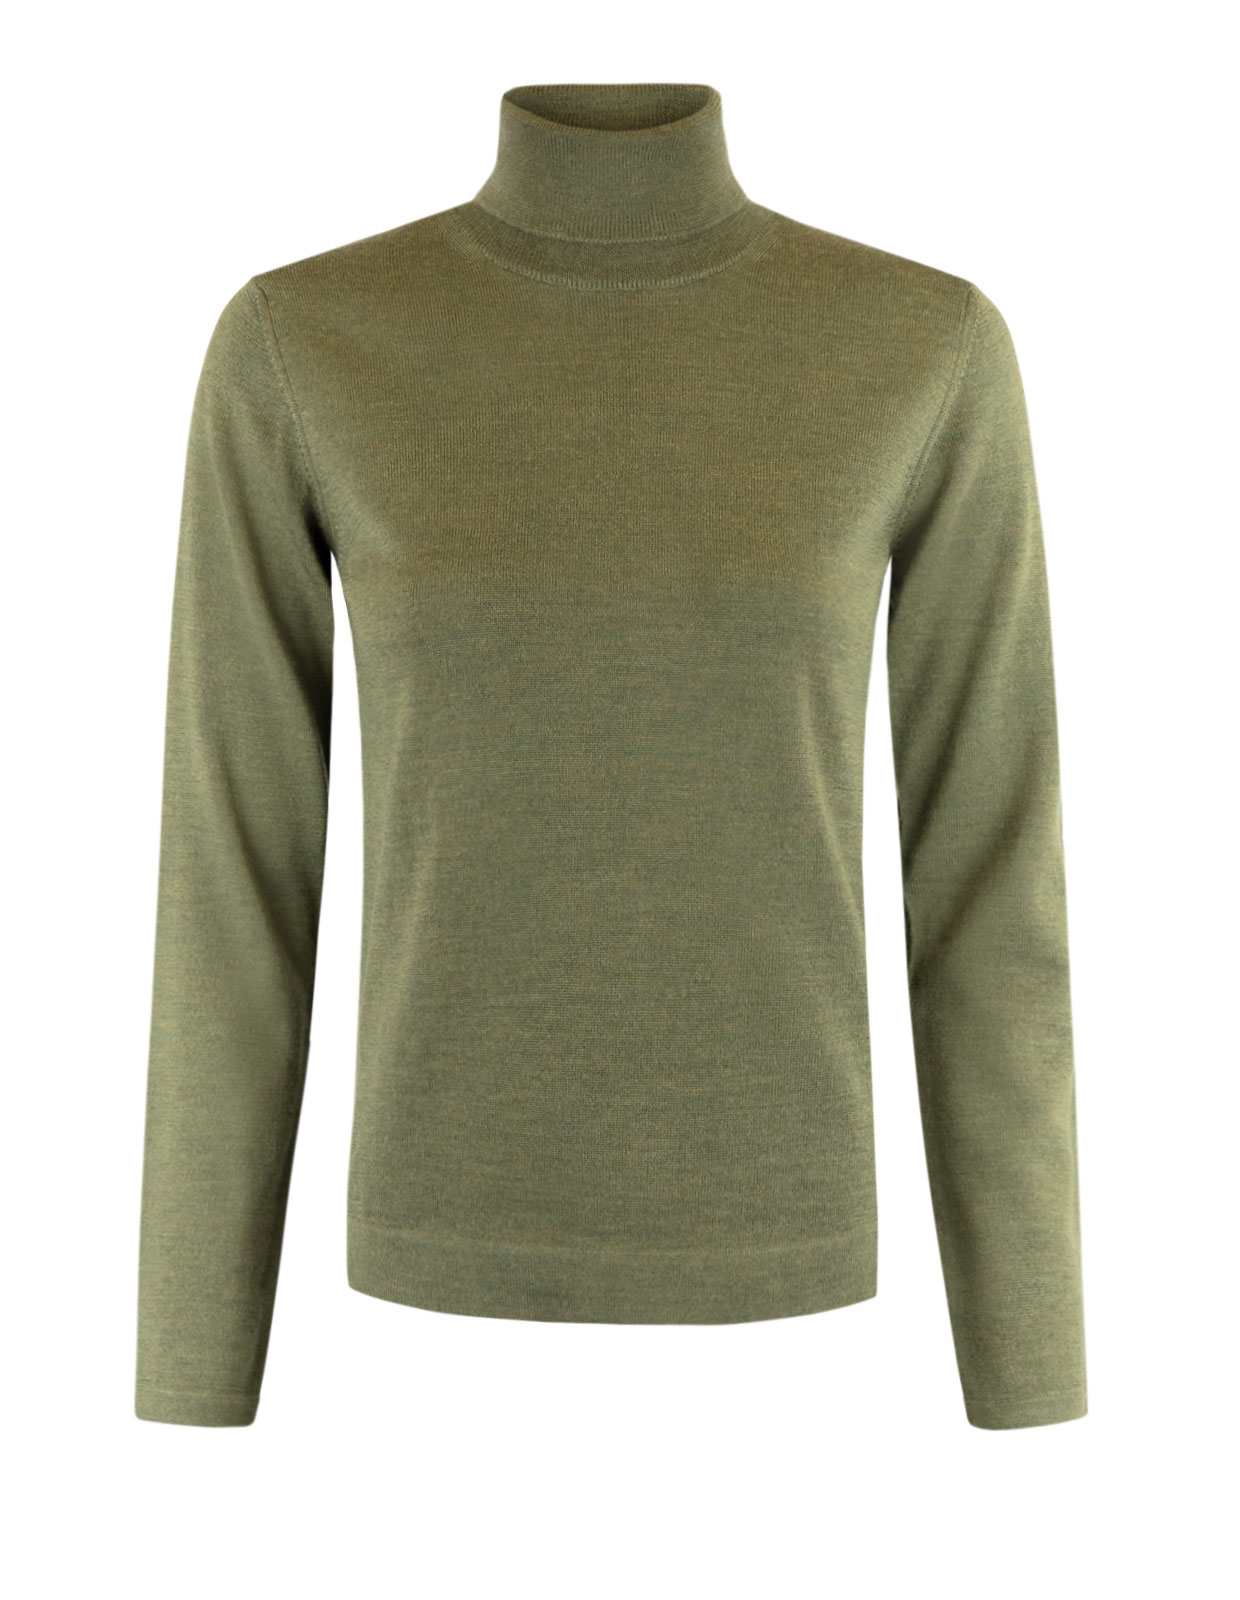 Turtle Neck Sweater Olive Green Stl S